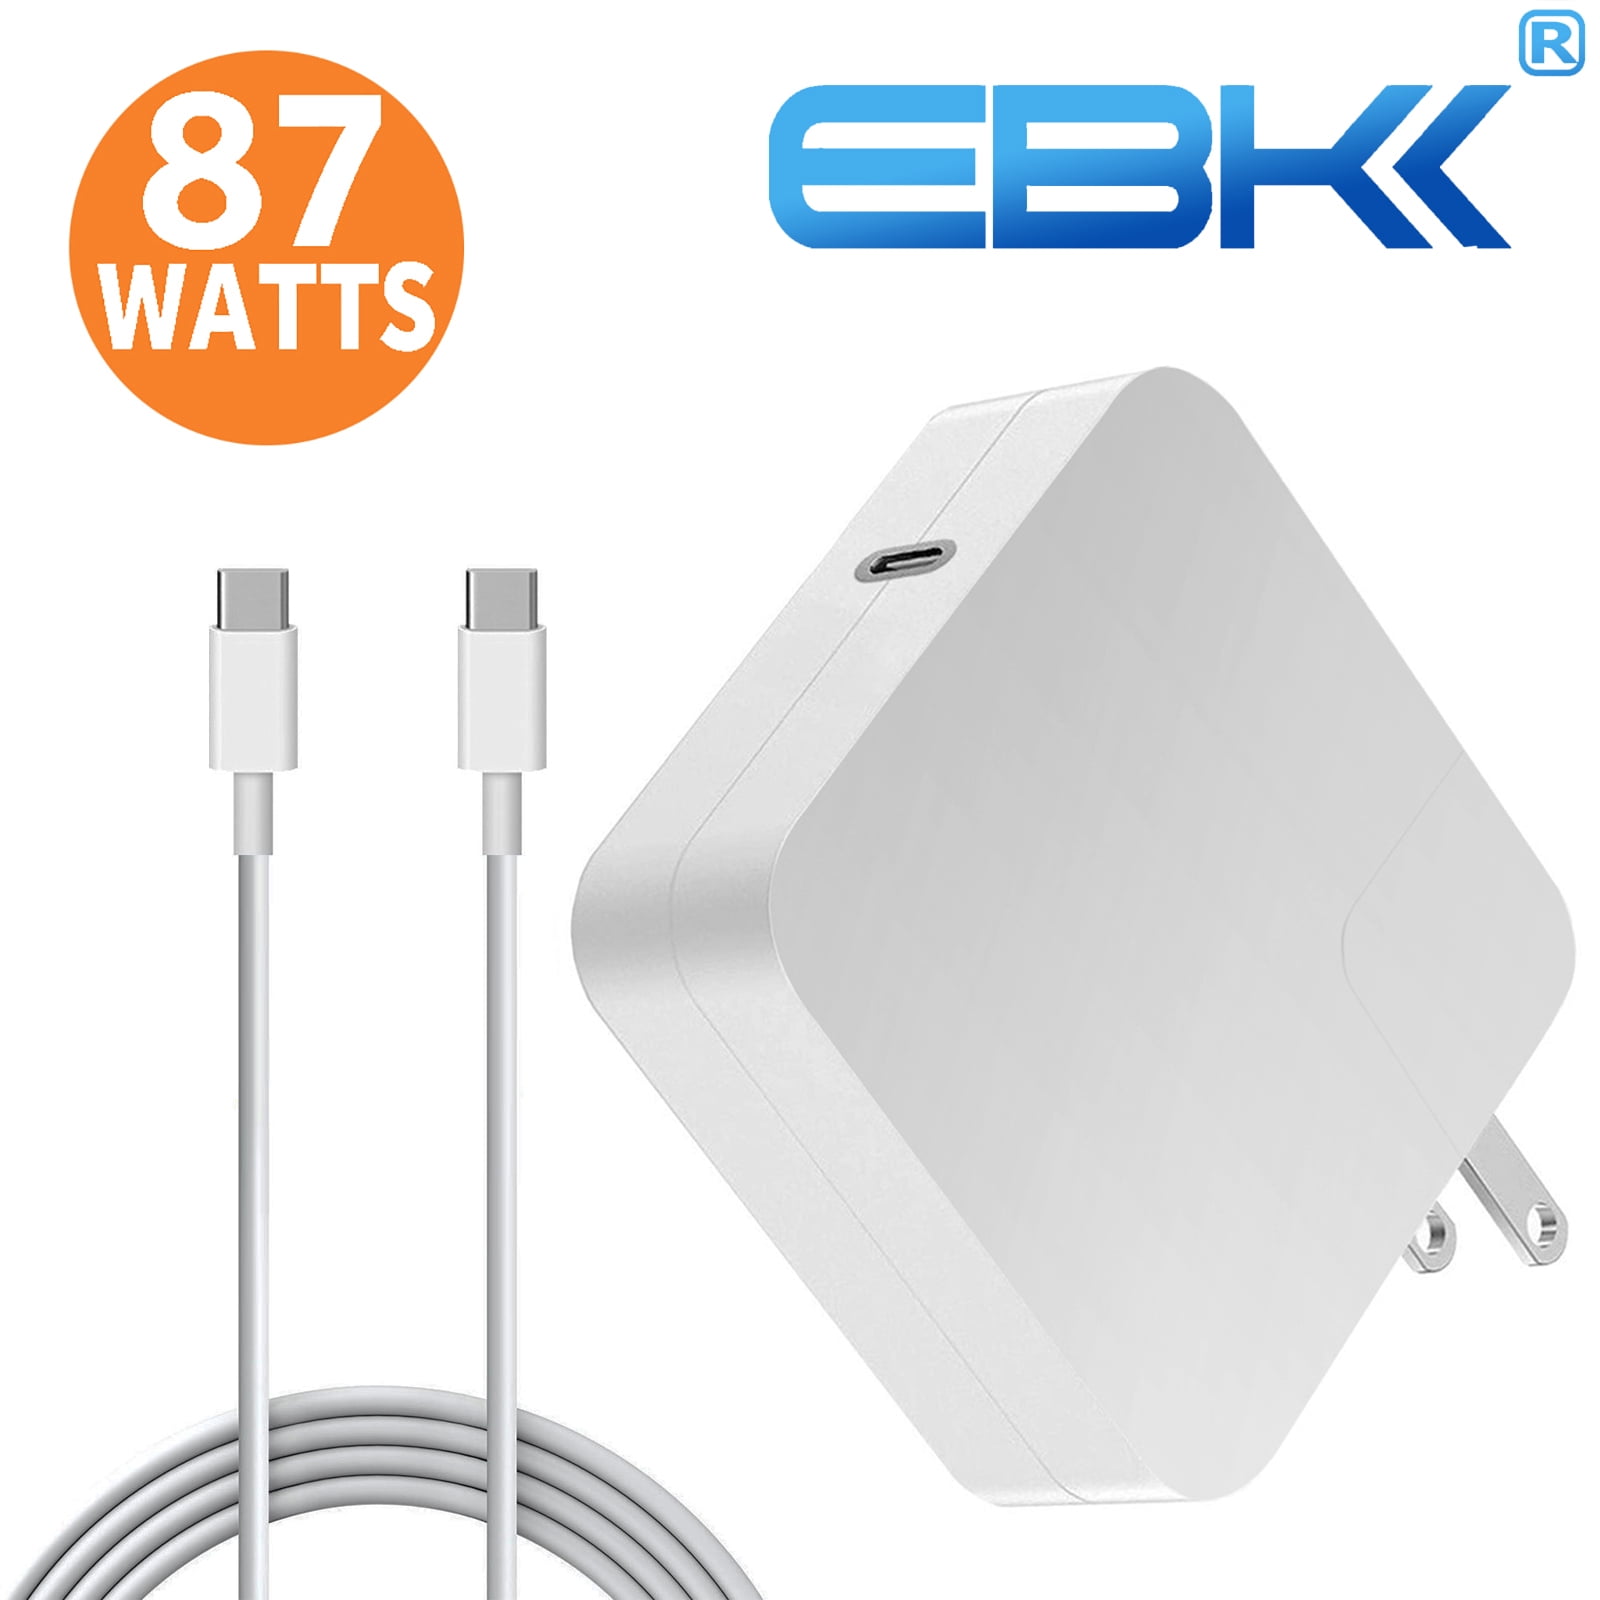 2019 macbook pro charger wattage